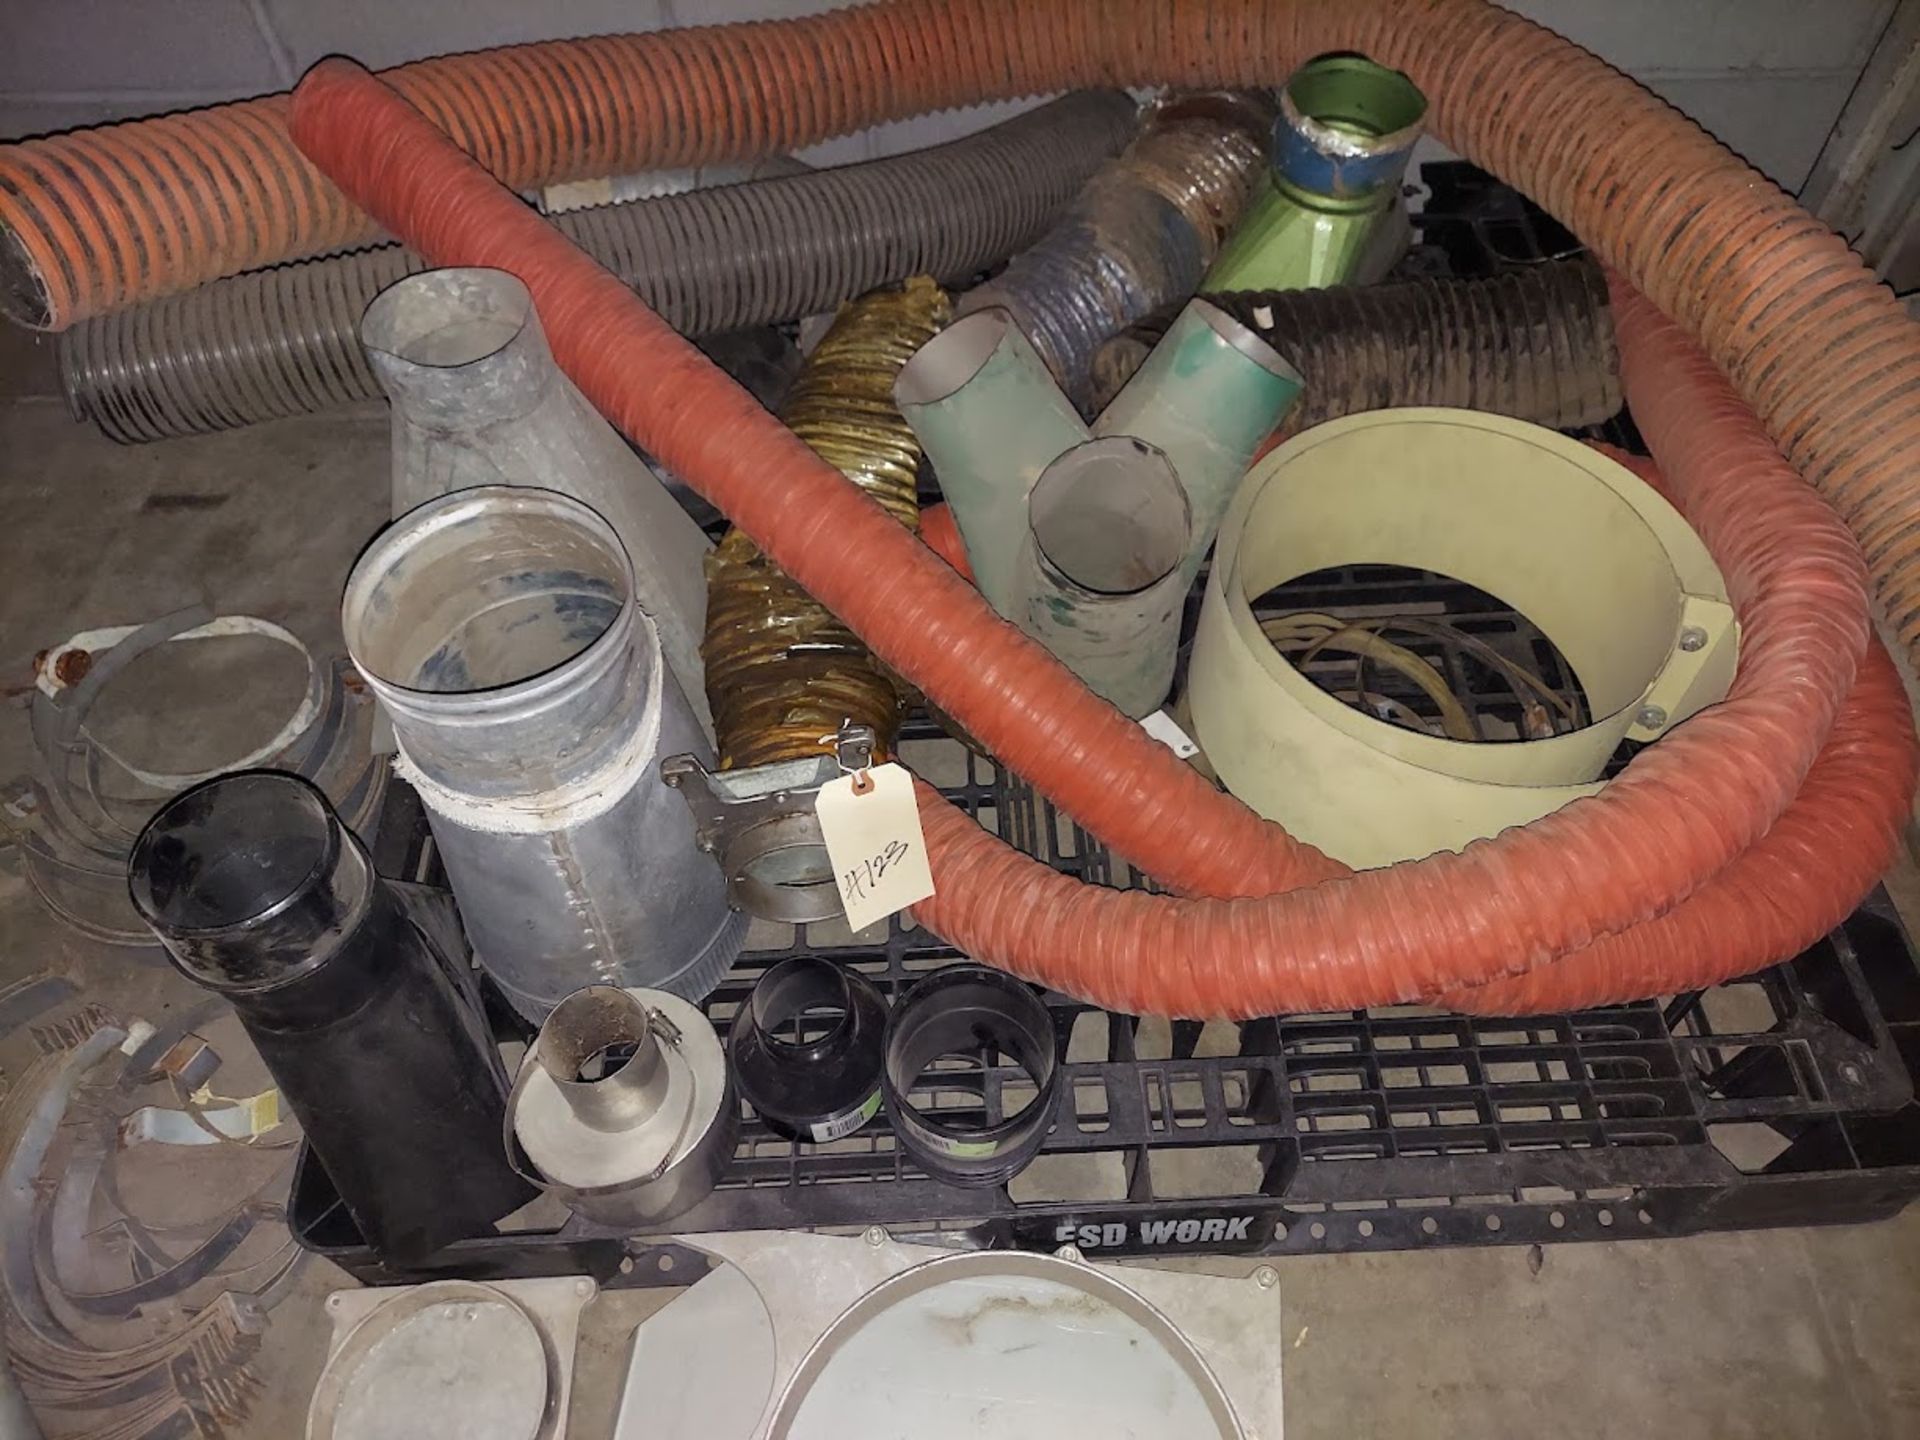 Misc Dust Collection Parts, Hoses, Blast Gates, & Fittings - Image 2 of 2